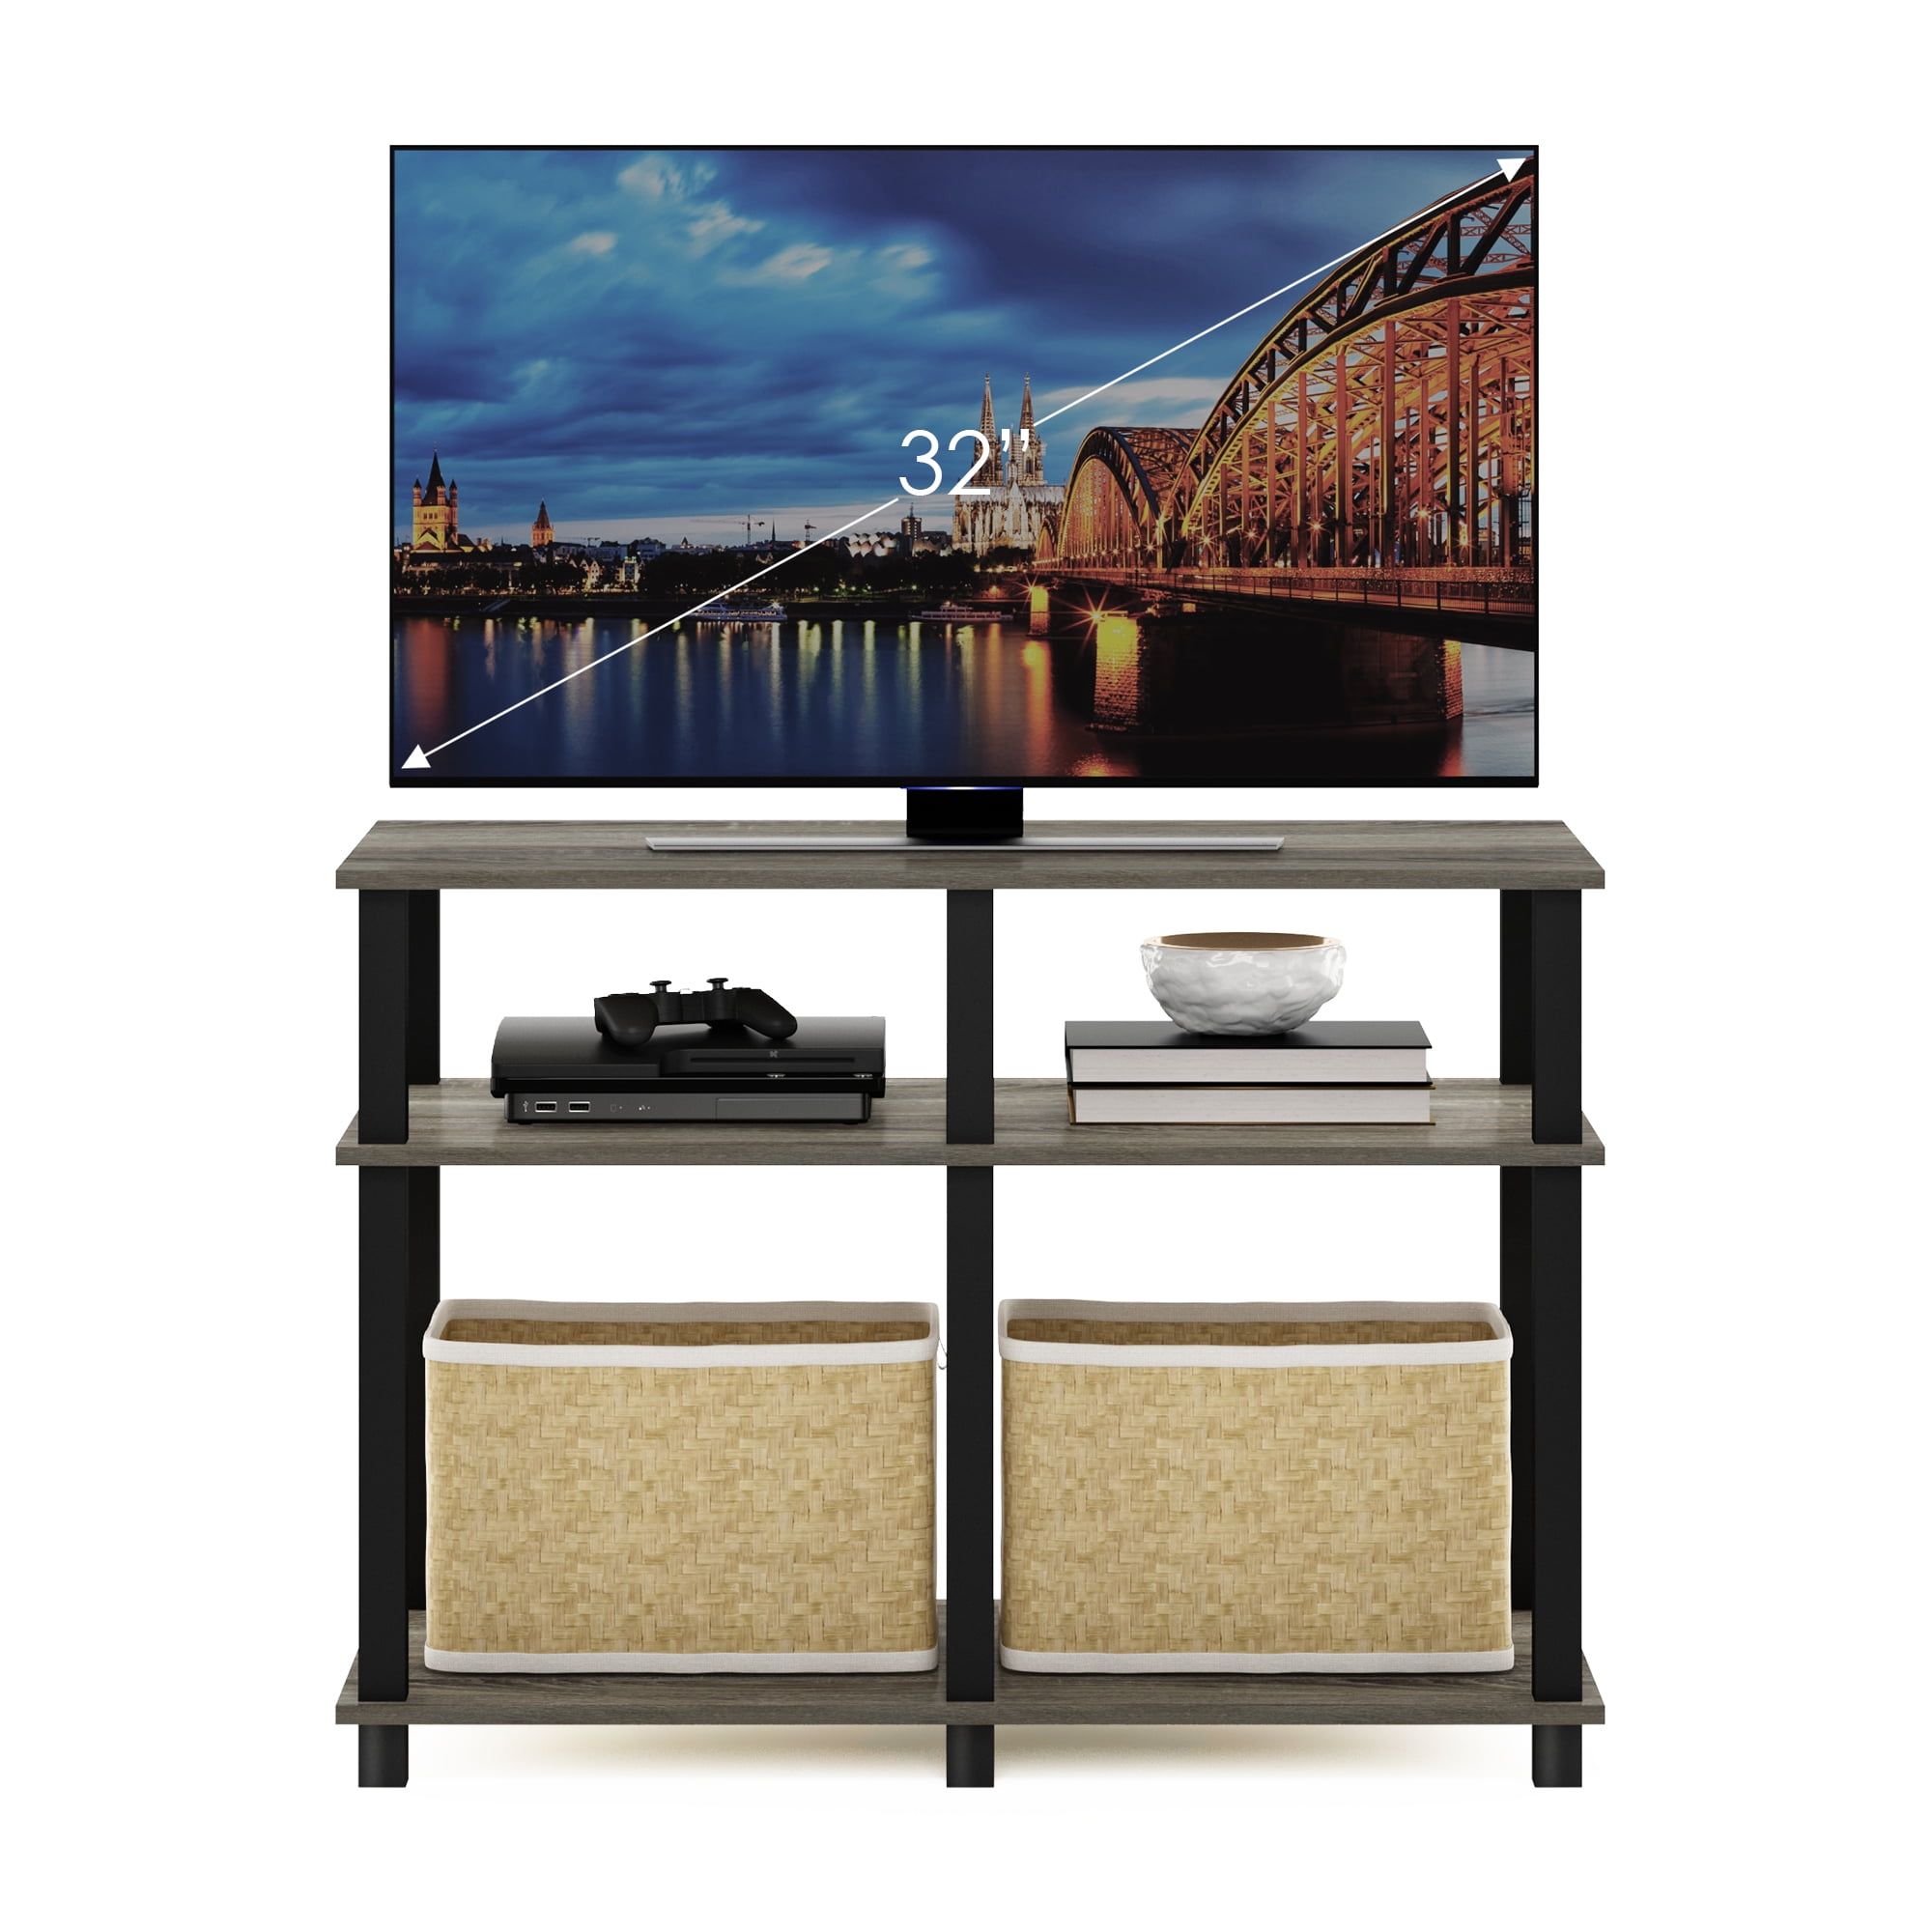 Furinno Romain Turn N Tube Tv Stand For Tv Up To 40 Inch, French Oak/Black  – Walmart Inside Romain Stands For Tvs (View 2 of 15)